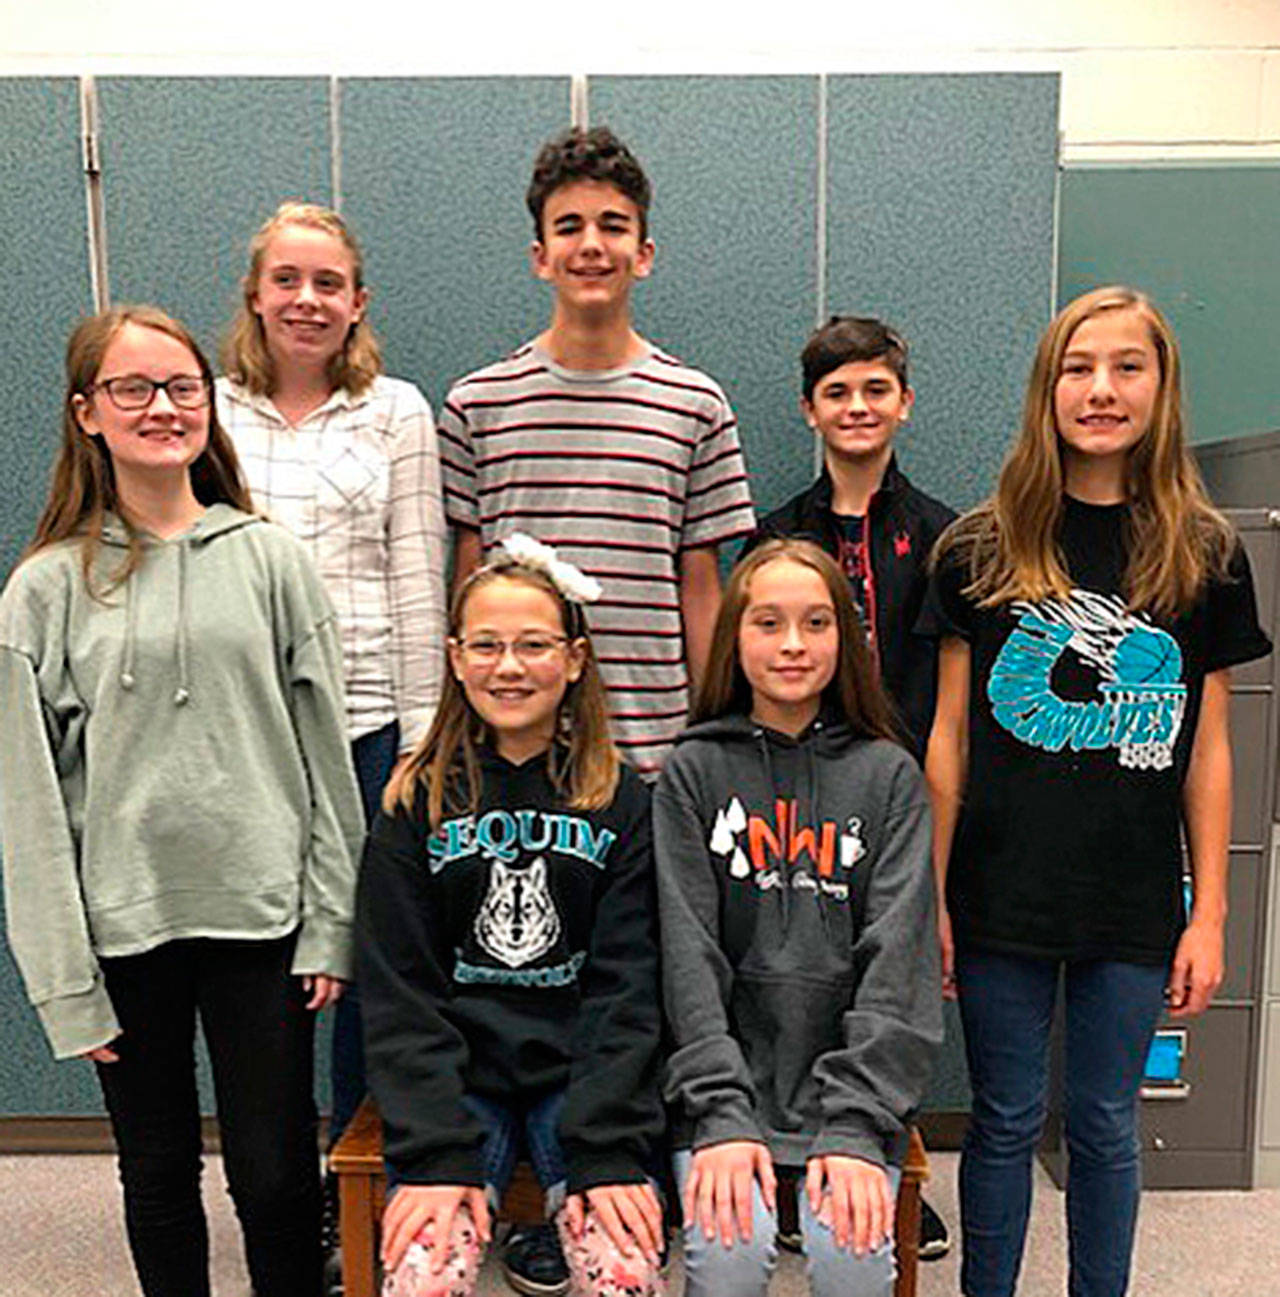 Sequim Middle School students selected for the WMEA Washington Music Educators Association’s All-State Choir include (back row, from left) Lilianna Mitchell, Emily McAliley, Ashton Drew, Garren Pocock and Taryn Johnson, and (front row, from left) Front two: Dana Carlile and Haley Dunn. Submitted photo